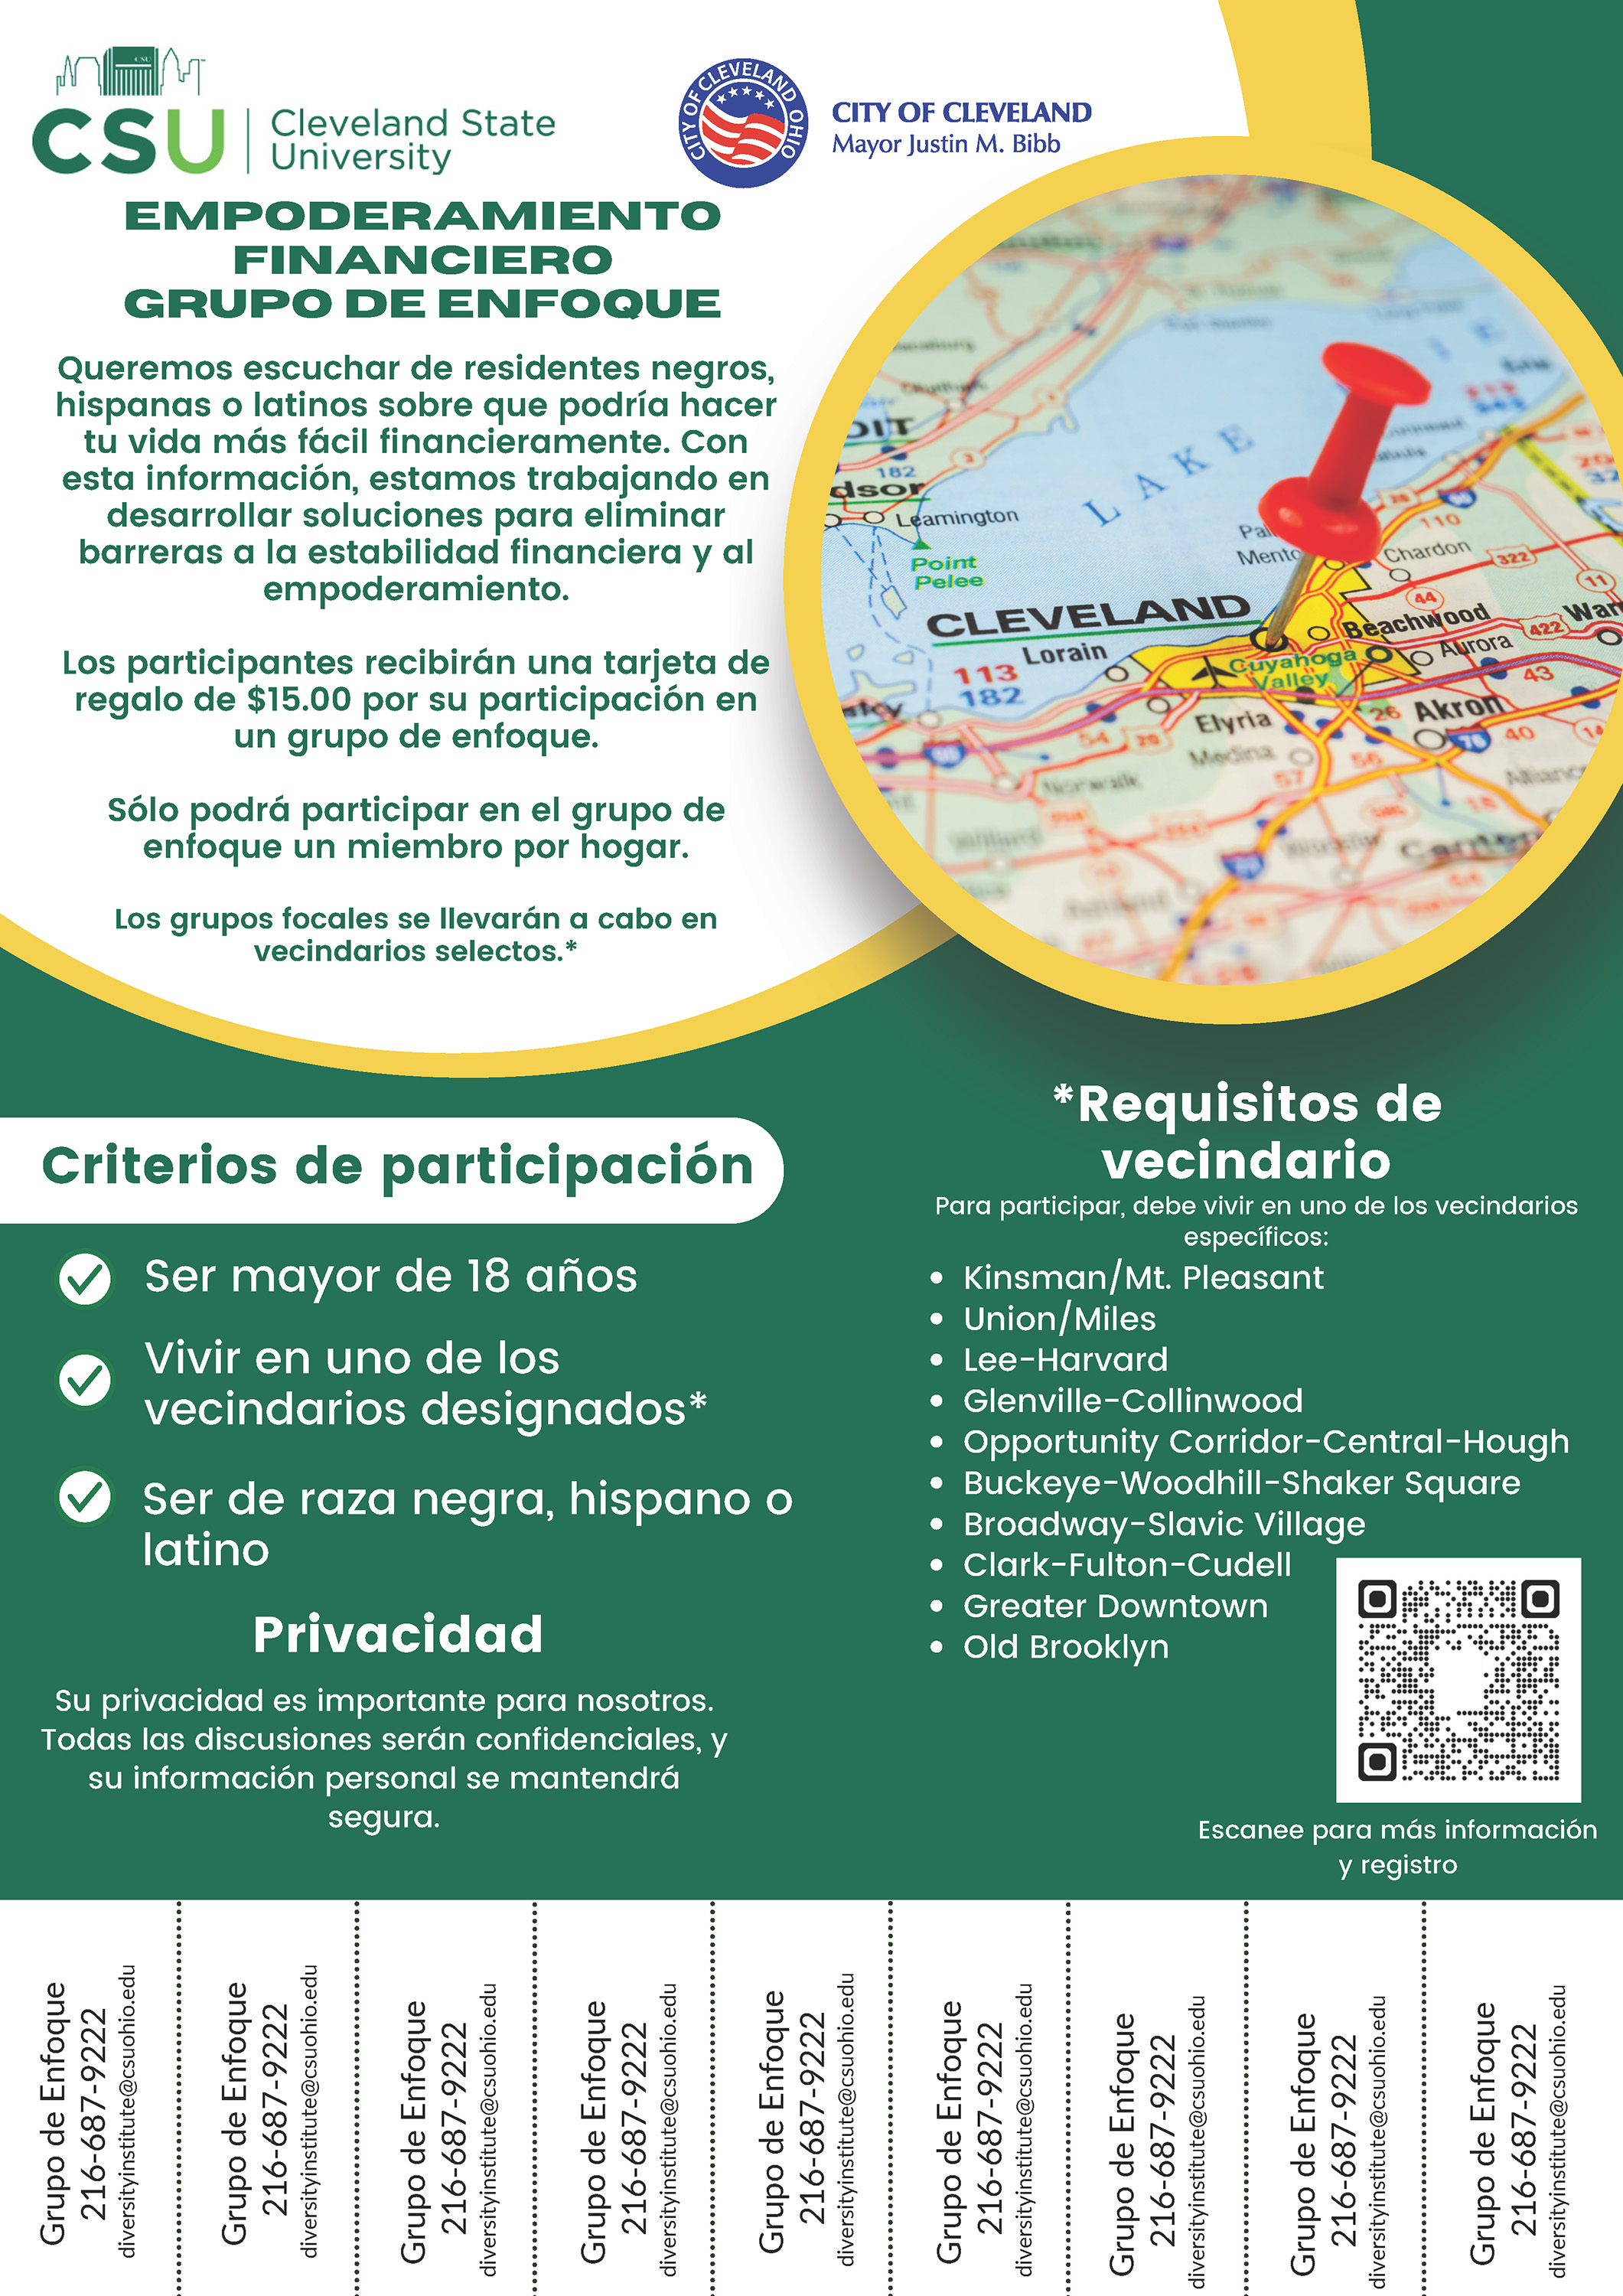 This is the Spanish language flier for the Financial Empowerment Group Cleveland State University is conducting for the City of Cleveland. The Flier has a green and white background with yellow text.